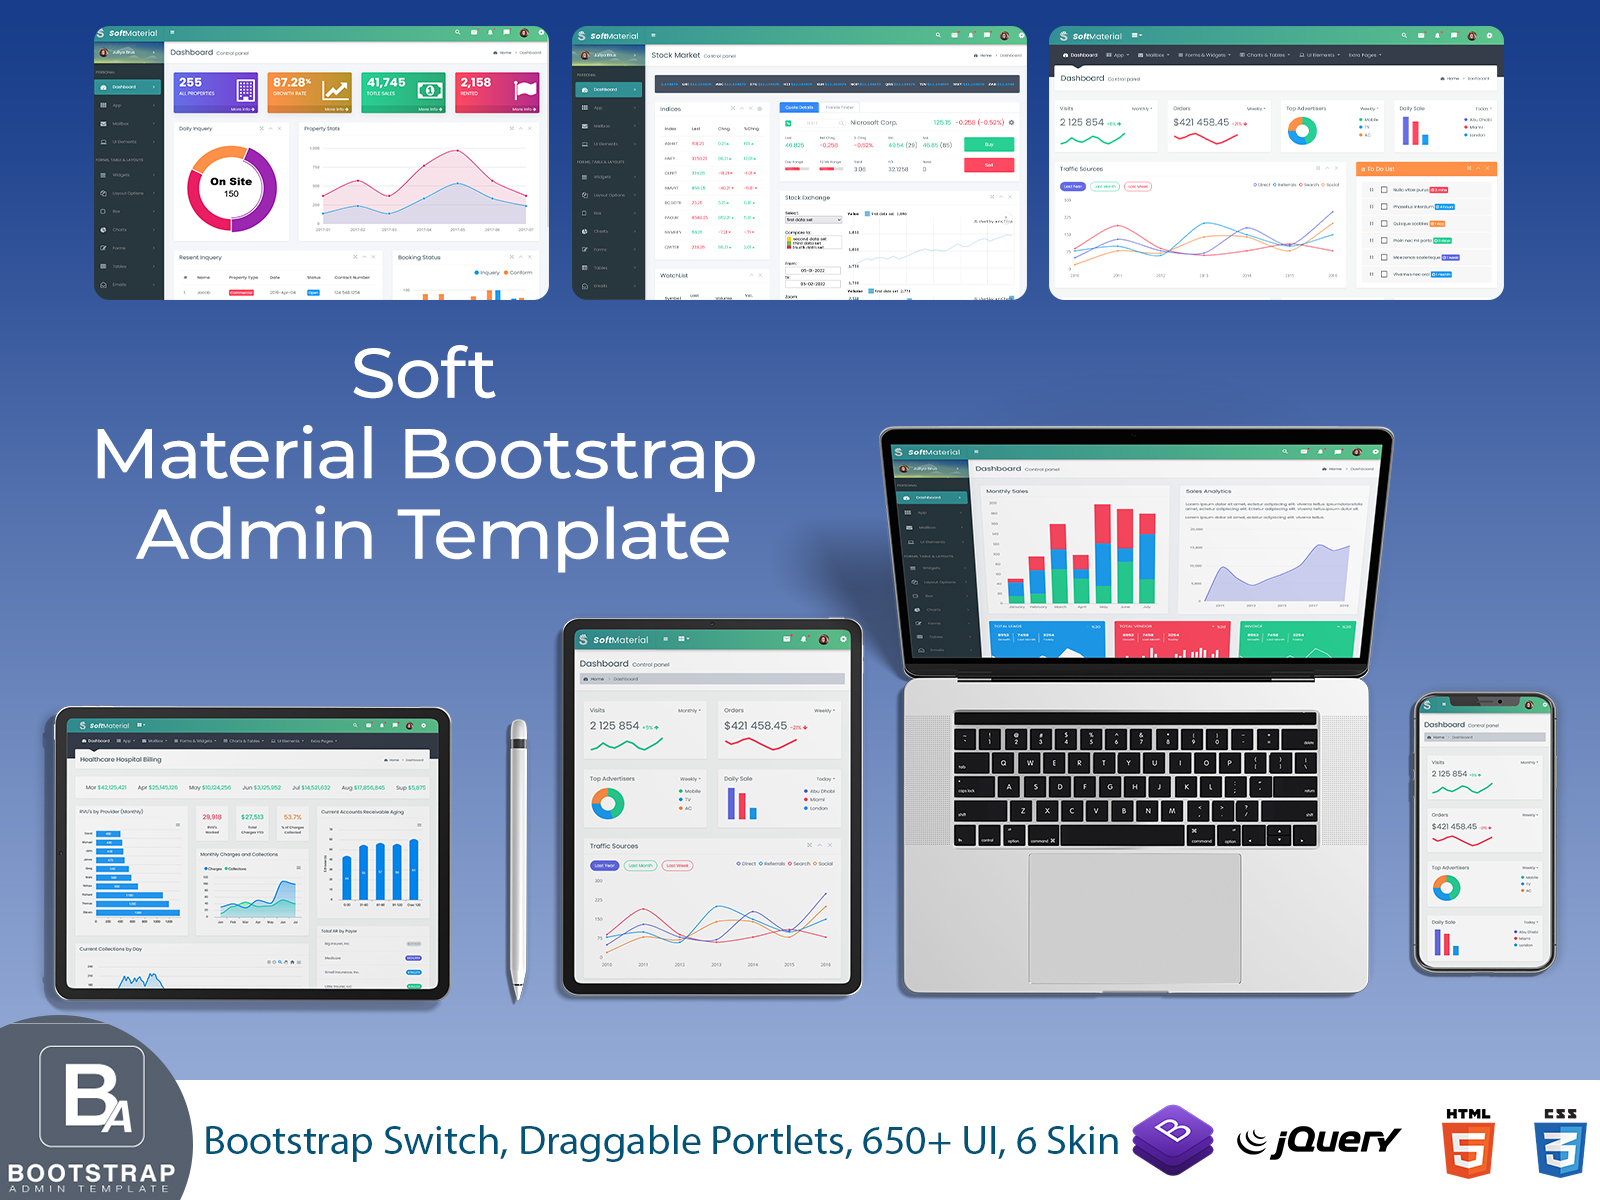 Soft Material Bootstrap Admin Template (15)